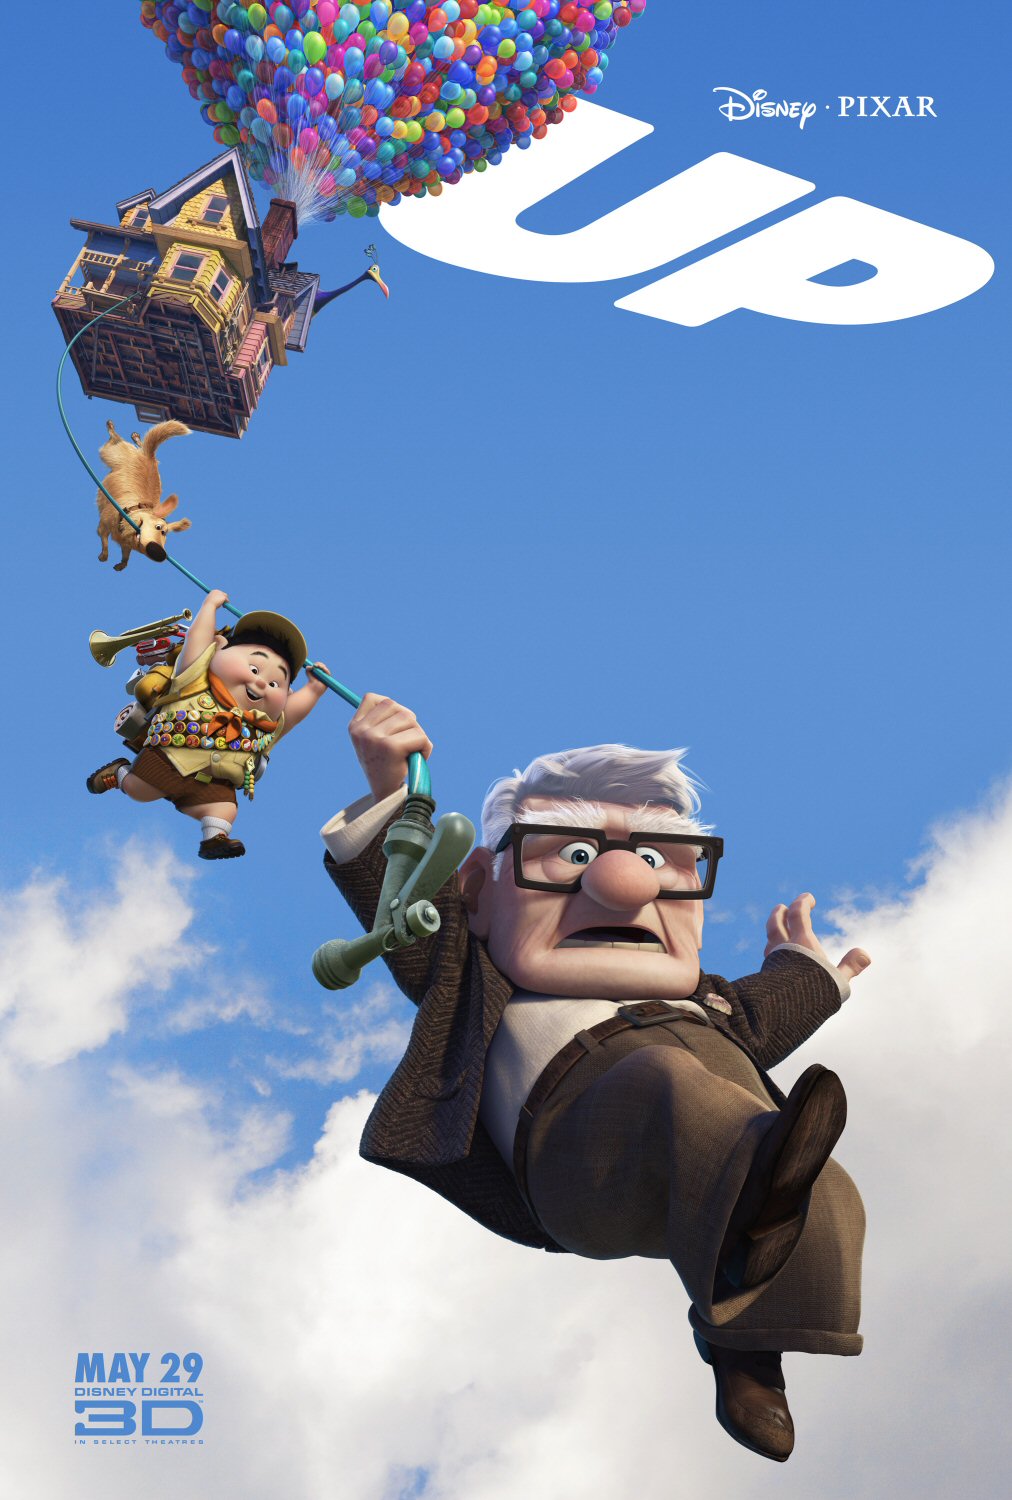 UP: The real locations behind the Pixar movie